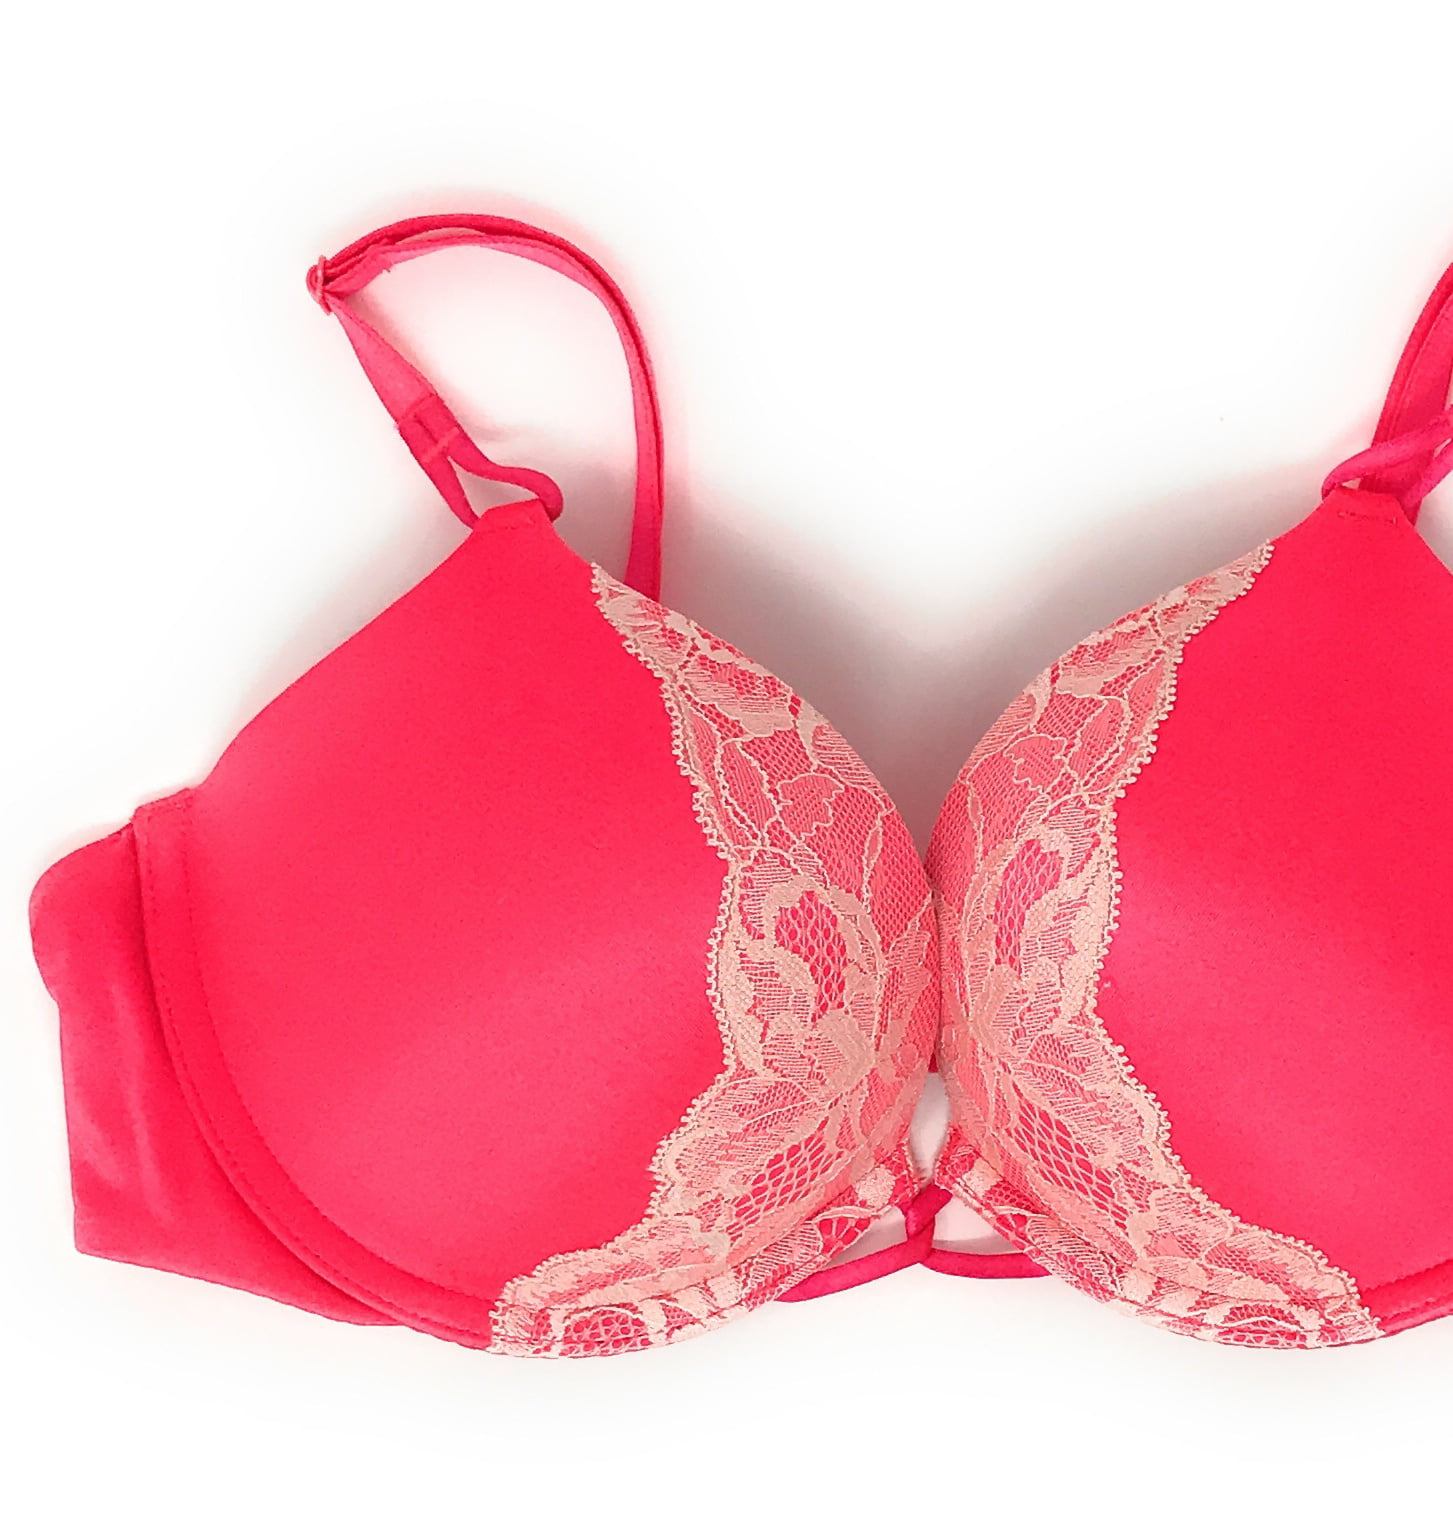 Victorias Secret Bombshell Bra 30A Red Plunge Add 2 Cups NWT $50 SISLOU R31P 